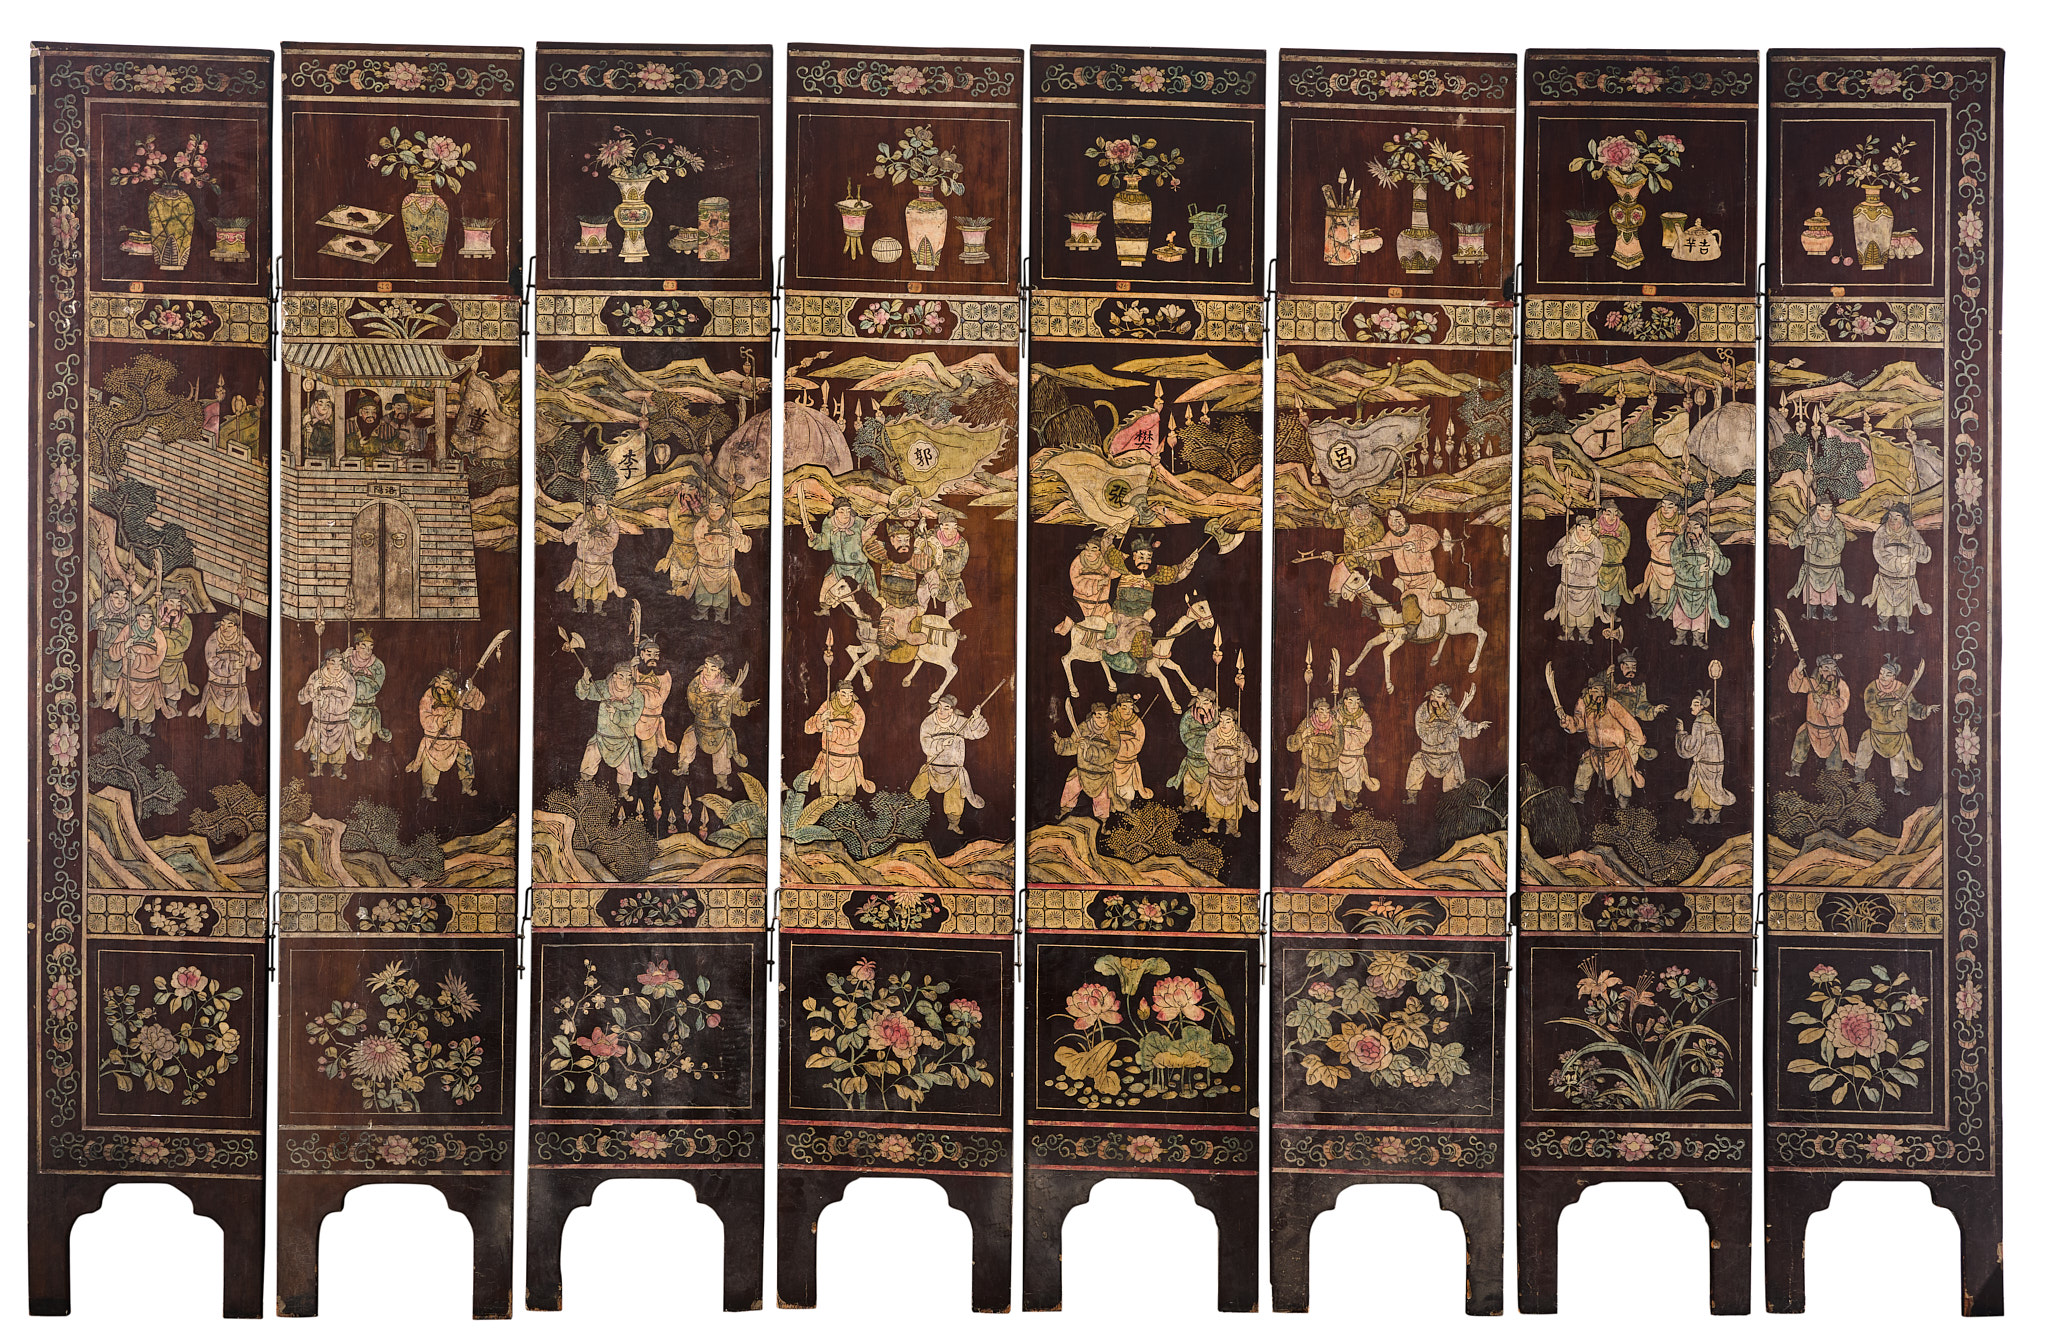 A CHINESE EIGHT-FOLD COROMANDEL LACQUER SCREEN, LATE QING DYNASTY, 19TH CENTURY